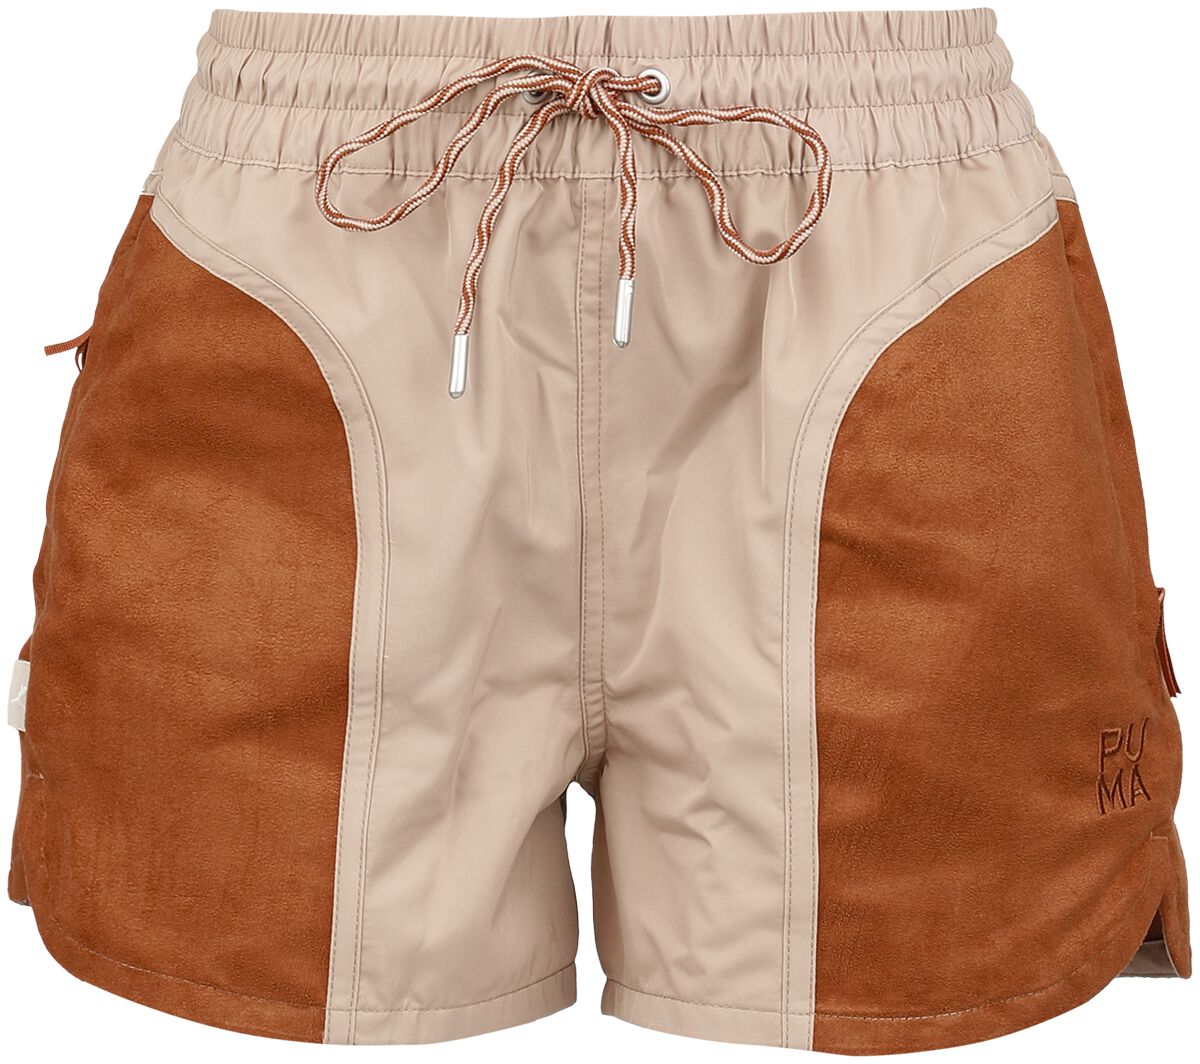 Image of Shorts di Puma - INFUSE woven shorts - XS a L - Donna - beige